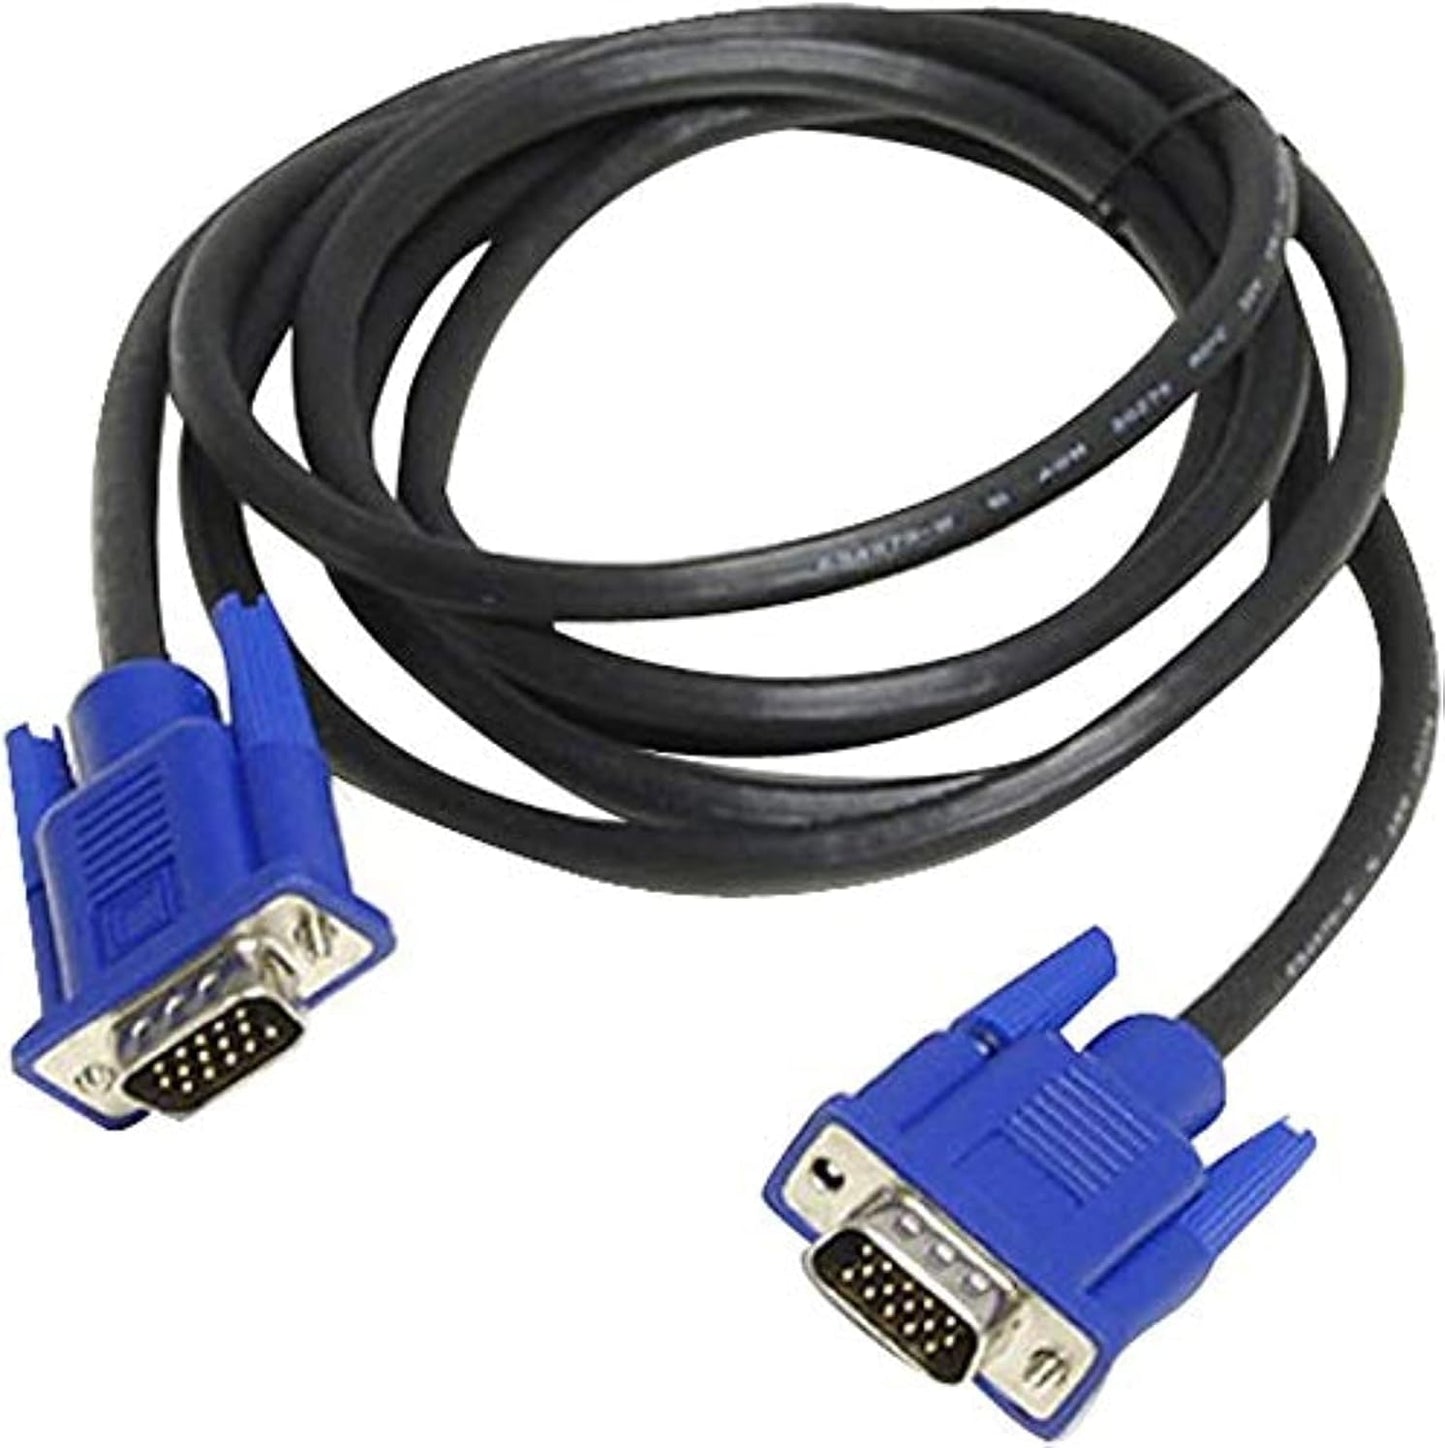 Vga cable 1.5 meter - black and blue